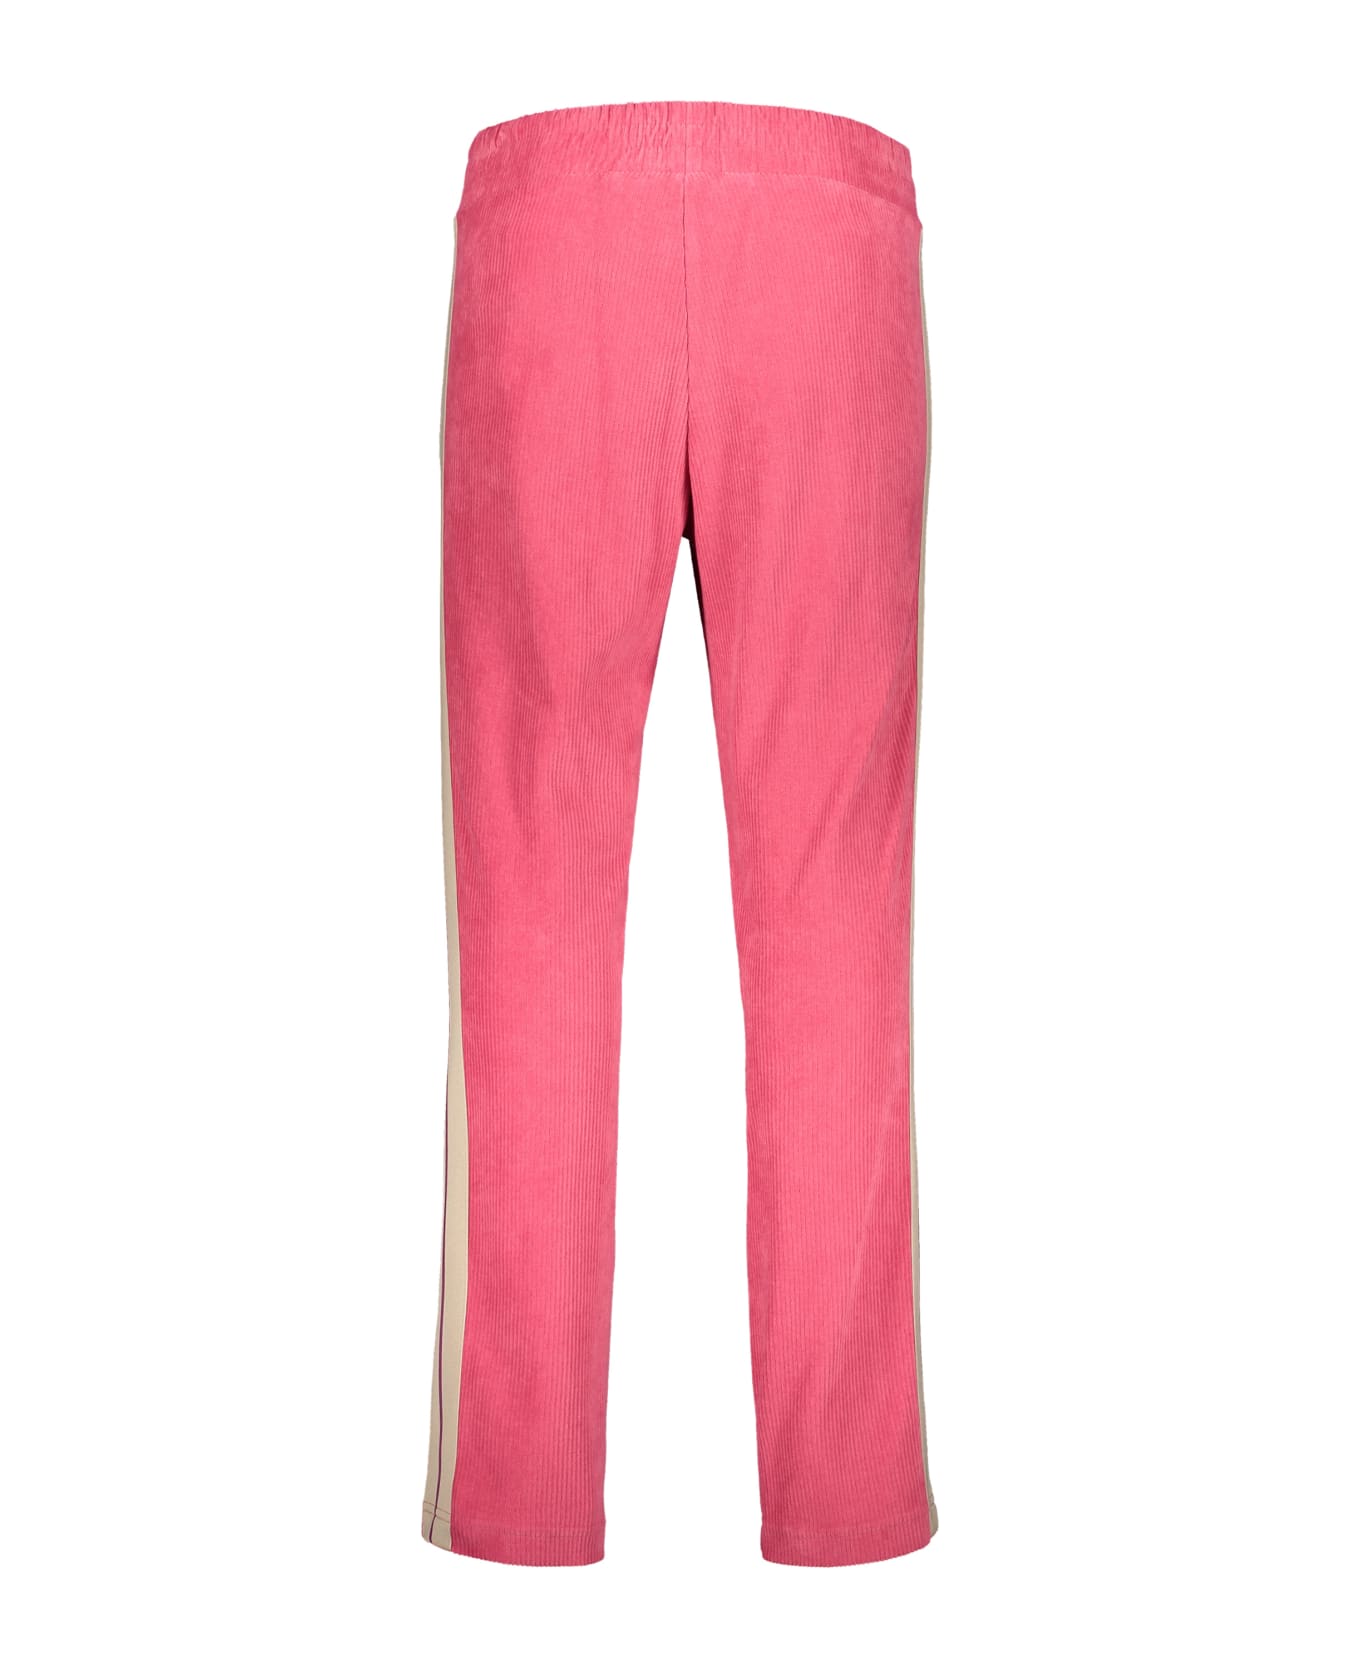 Palm Angels Corduroy Trousers - Pink